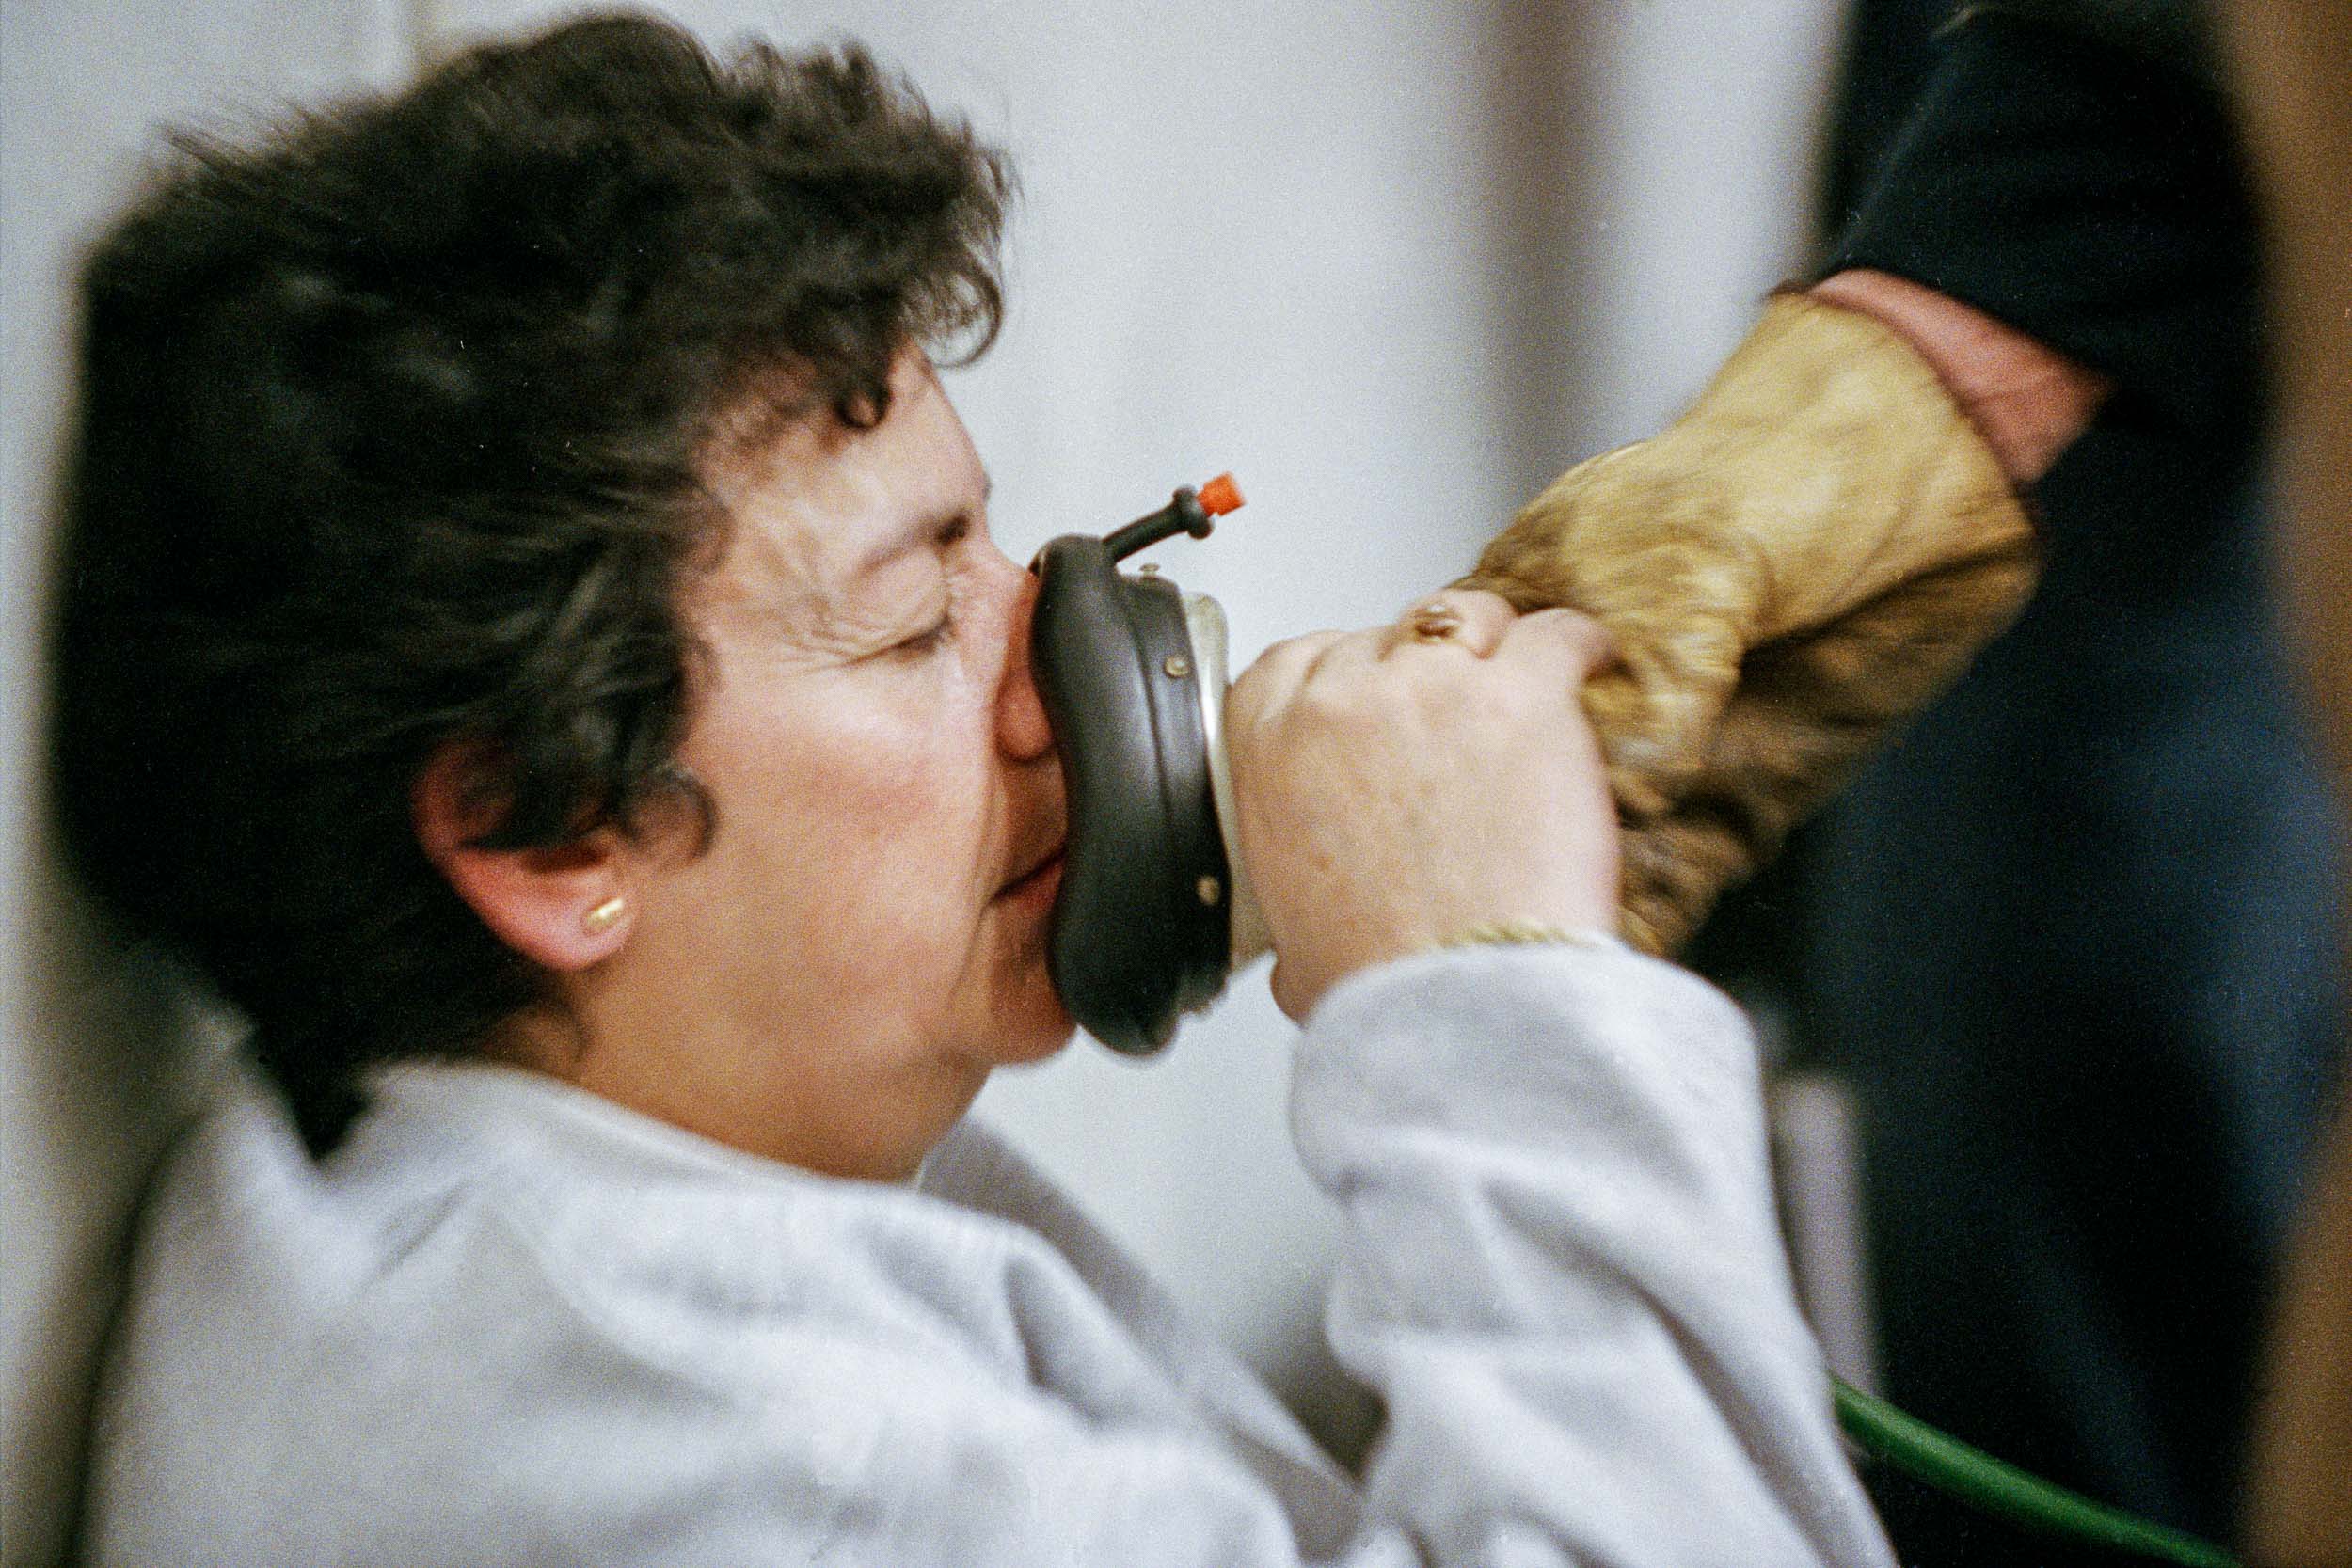 Office worker receiving  medical treatment in the lobby of the World Trade Center, NY, 1993